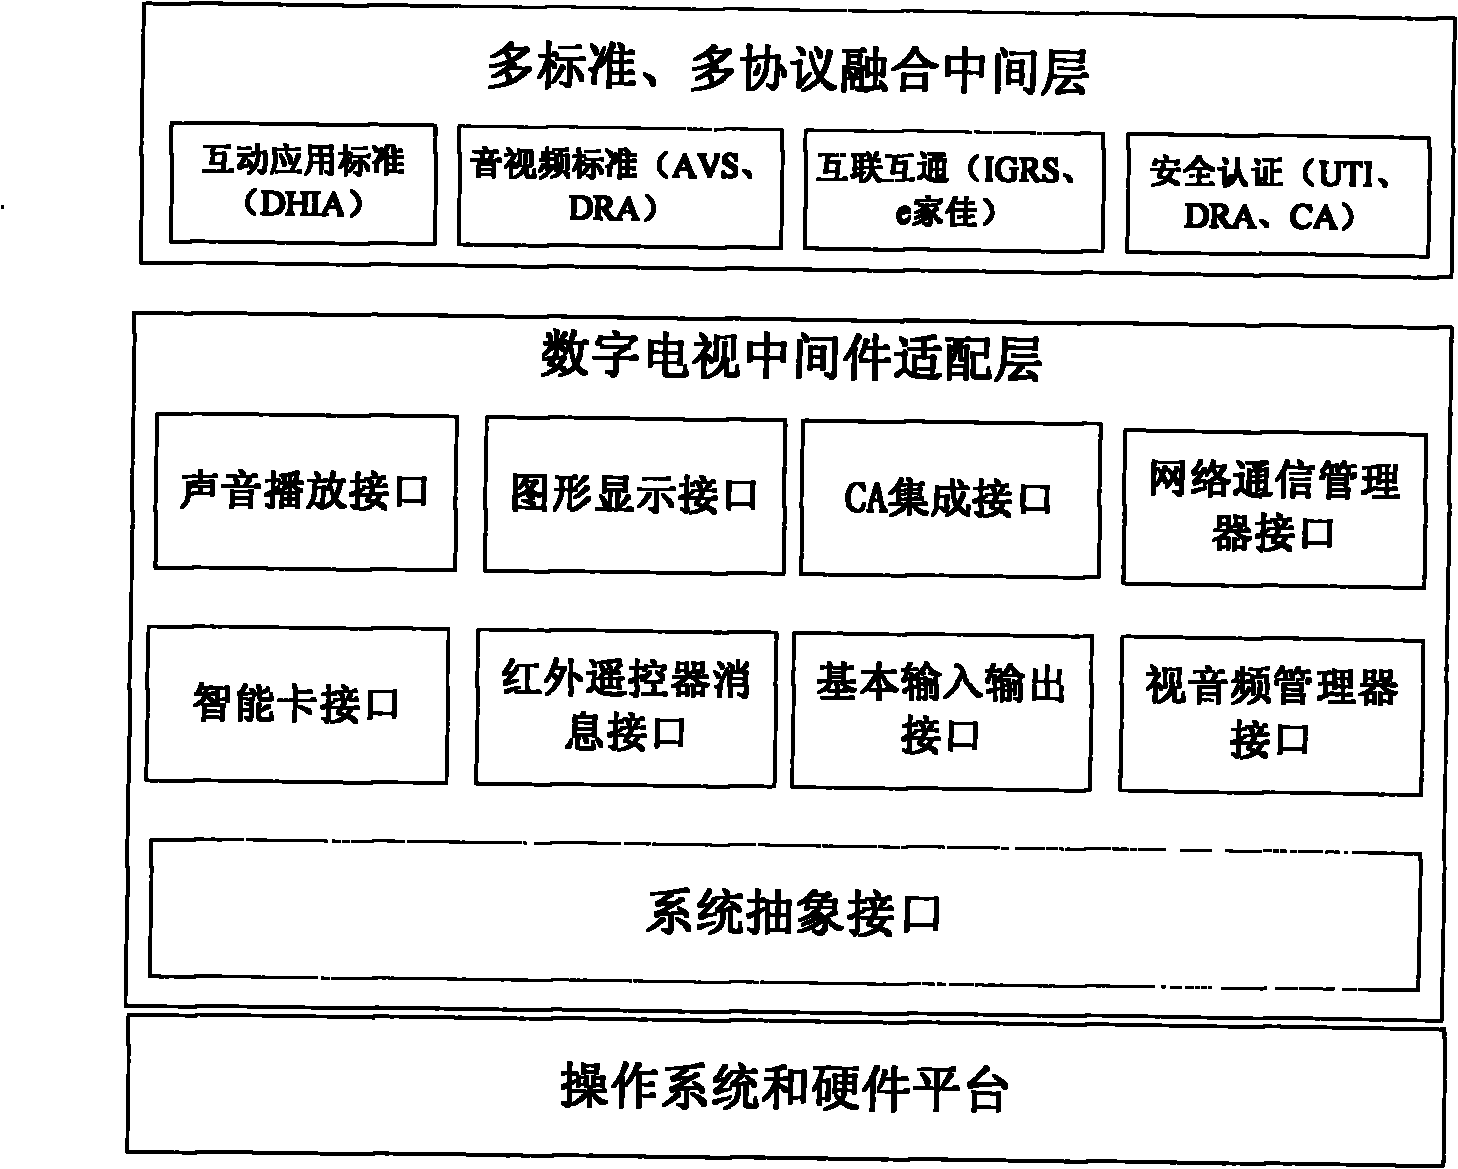 General middleware adaptation layer system for digital television